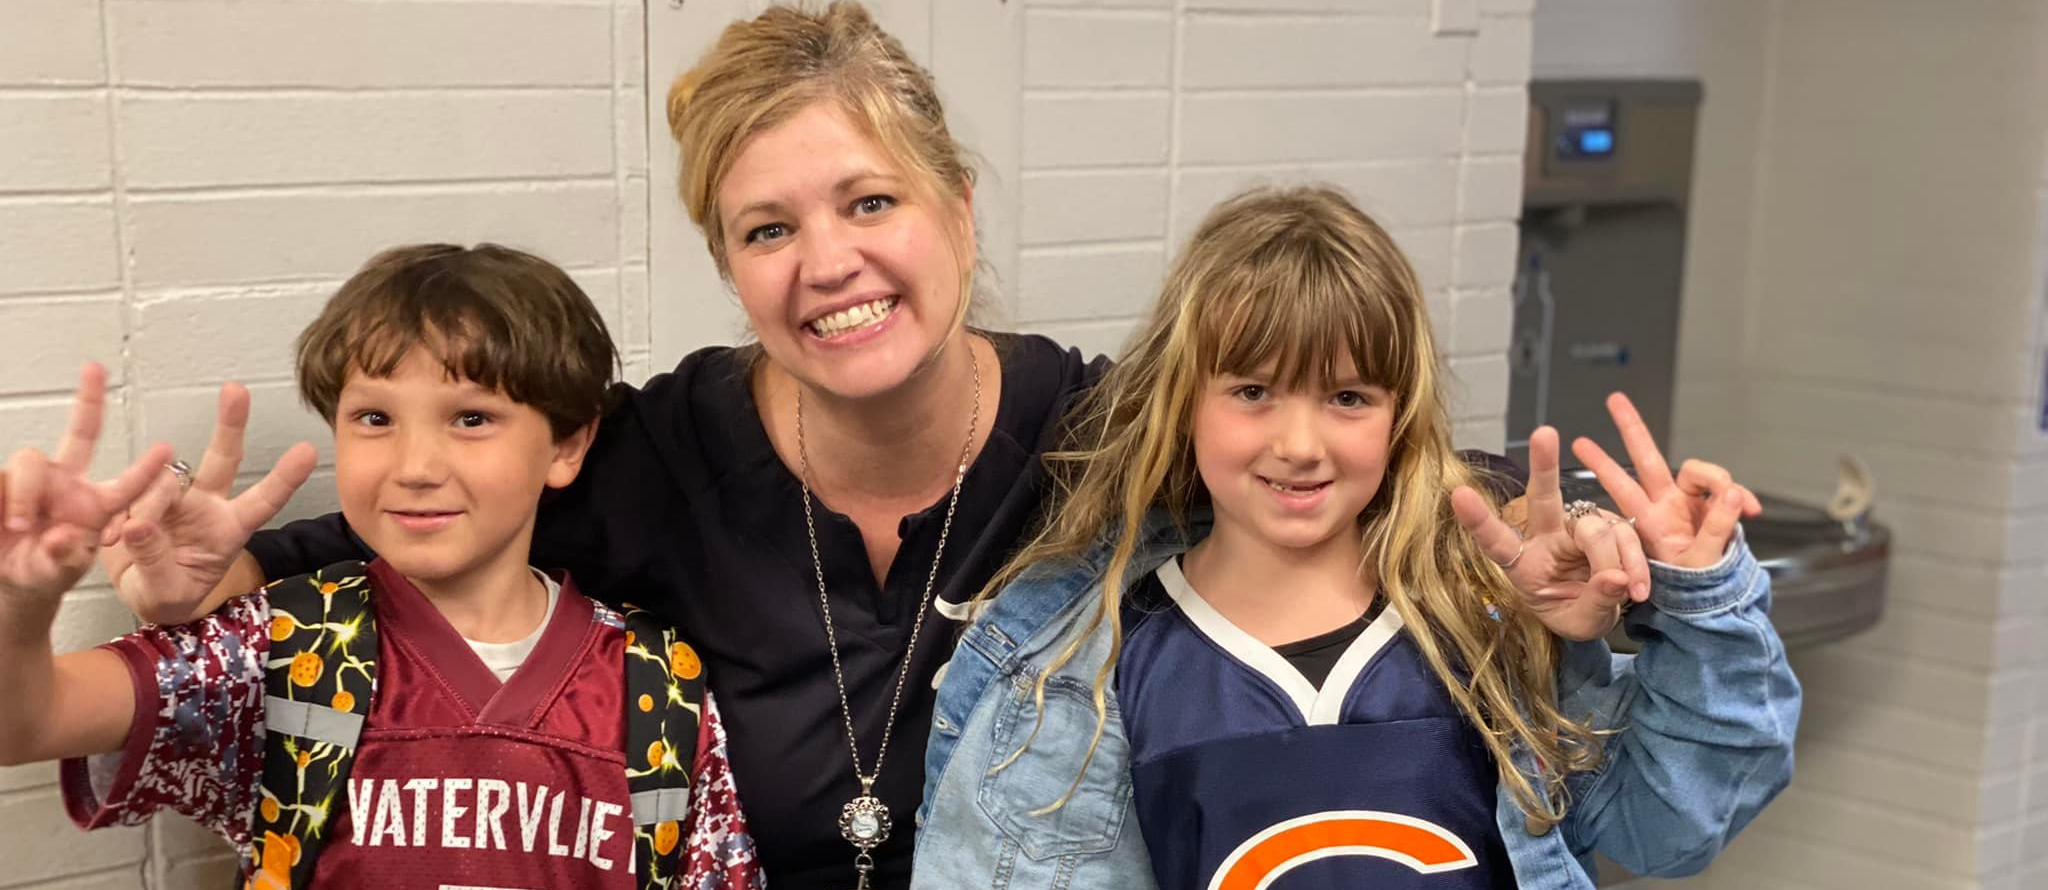 A teacher with a boy and girl student on Jersey Day, wearing team jerseys